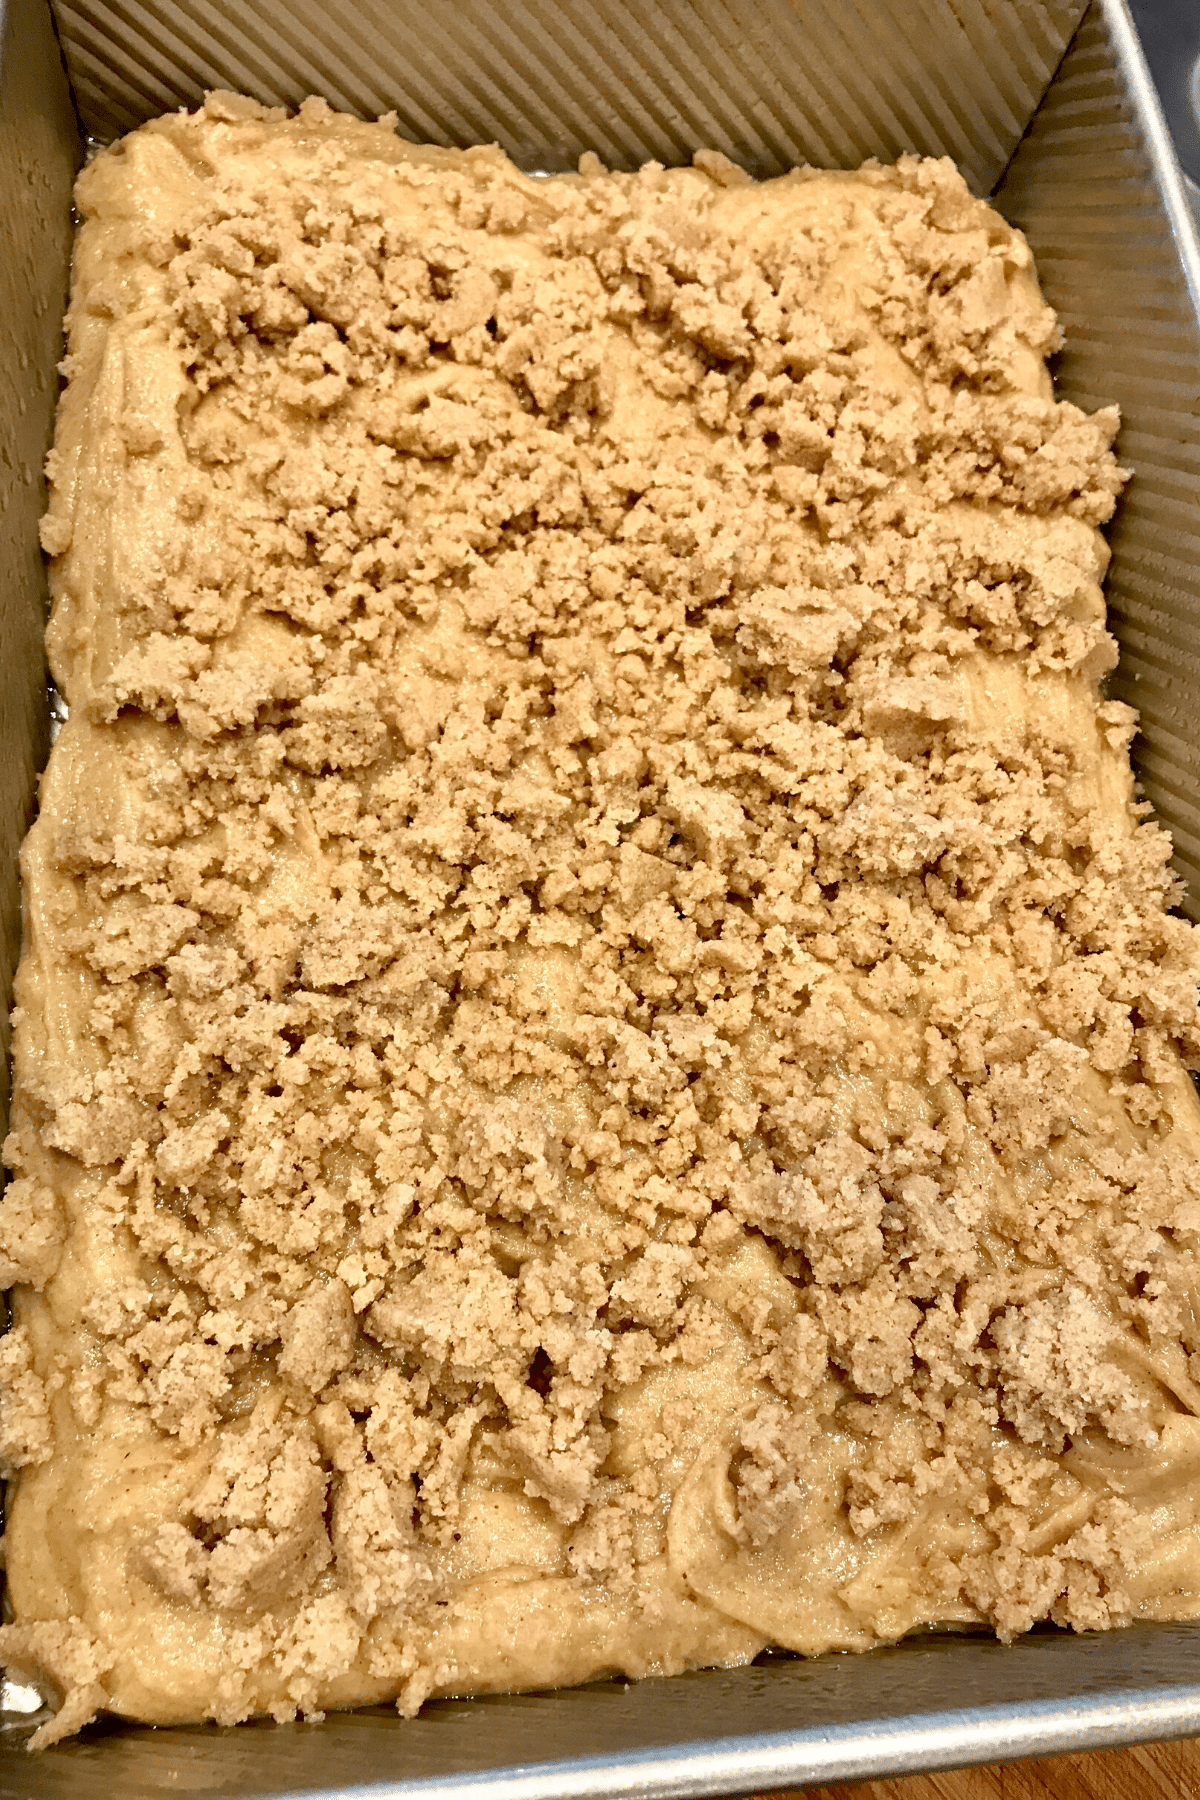 Cinnamon crumb streusel crumbled on top of the gluten-free coffee cake batter. 